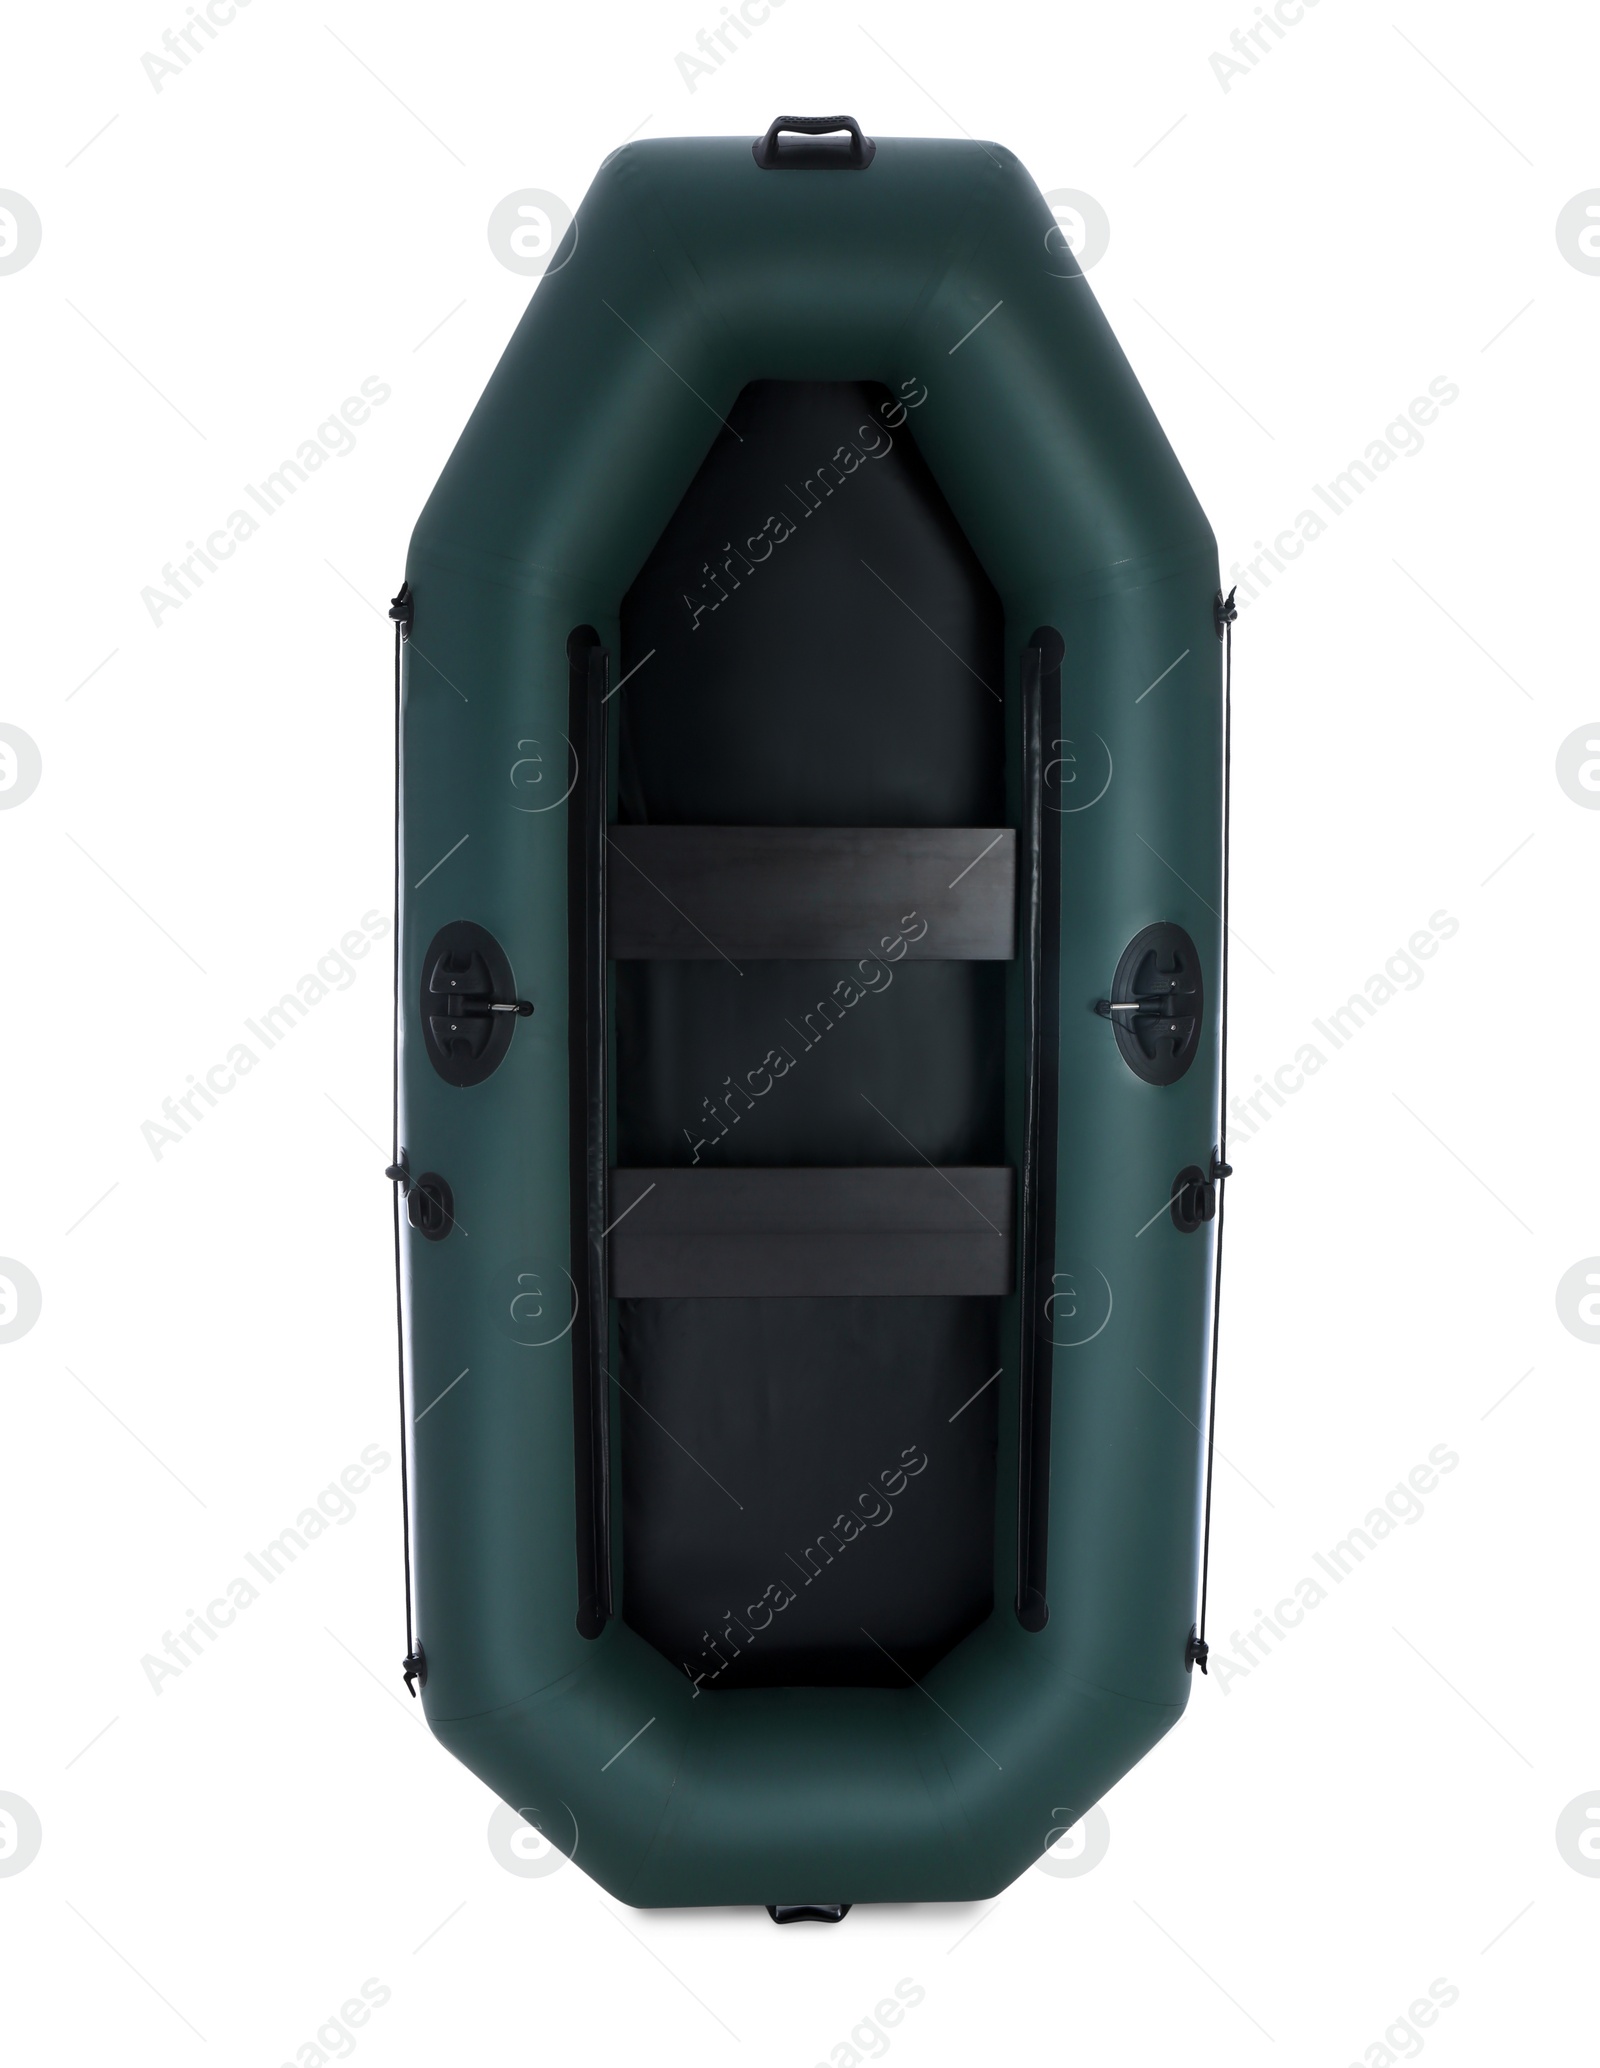 Photo of Inflatable rubber fishing boat with seats isolated on white